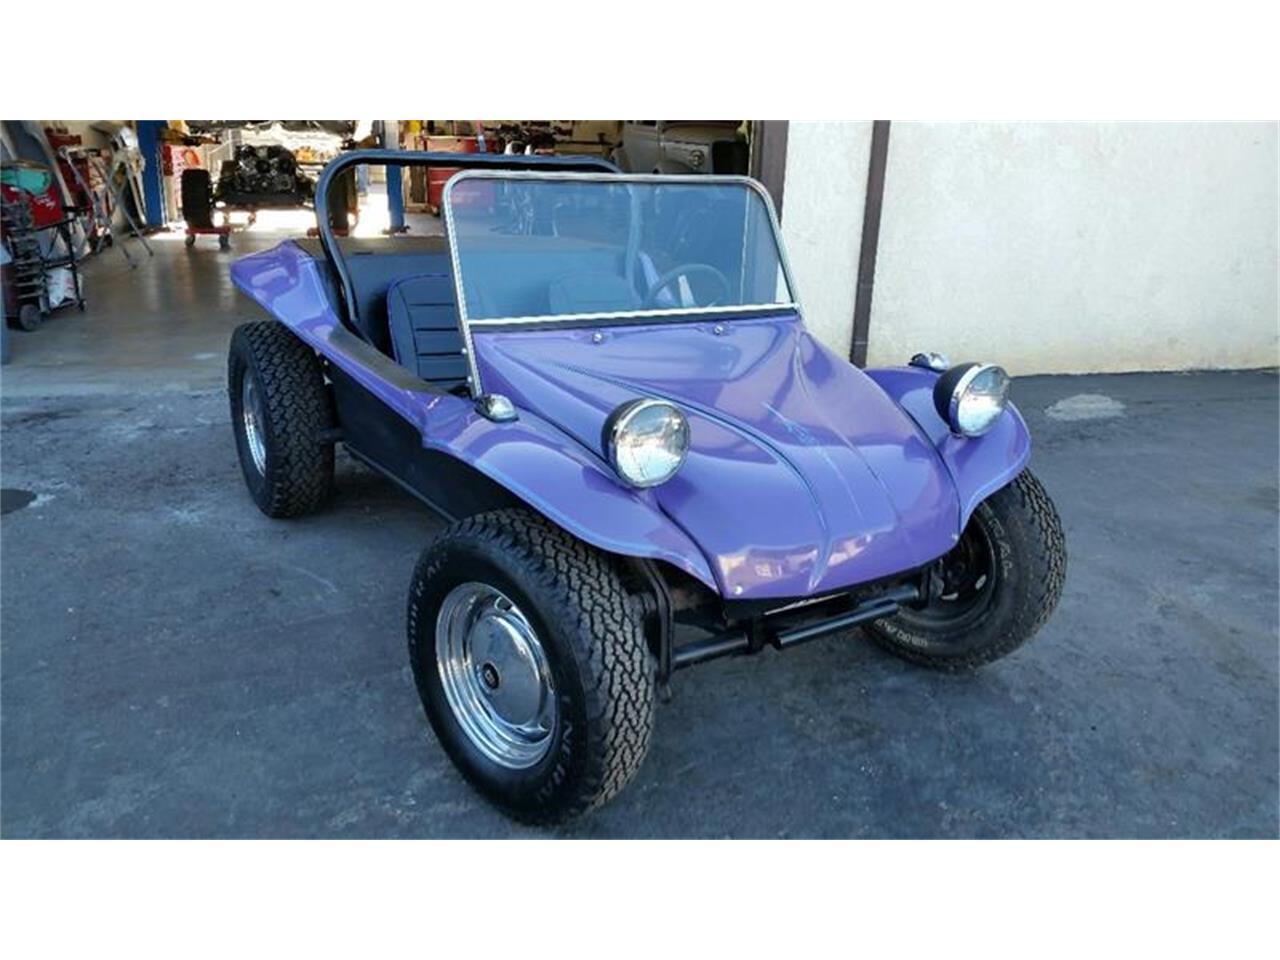 1964 vw dune buggy for sale